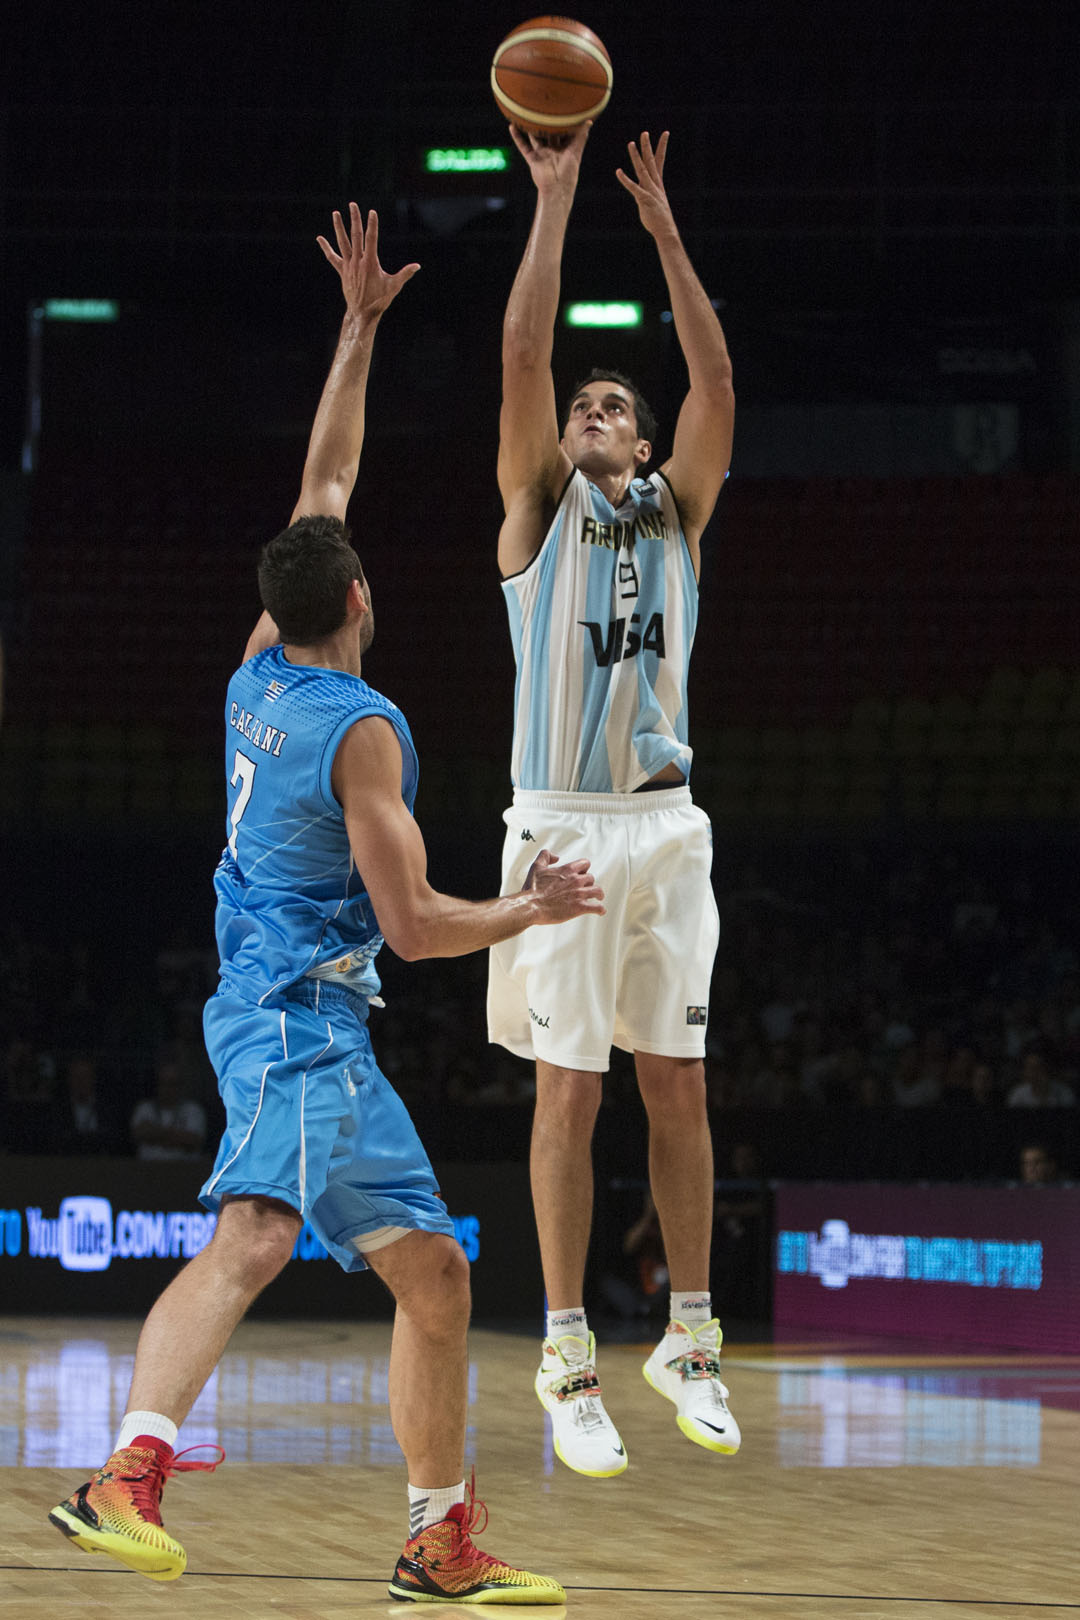 MEXICO CITY, MEXICO - SEPTEMBER 06: Leonardo Mainoldi of Argentina shootsagainst Mathias Calfani of Uruguay during a second stage match between Argentina and Uruguay as part of the 2015 FIBA Americas Championship for Men at Palacio de los Deportes on September 06, 2015 in Mexico City, Mexico. (Photo by Miguel Tovar/LatinContent/Getty Images)